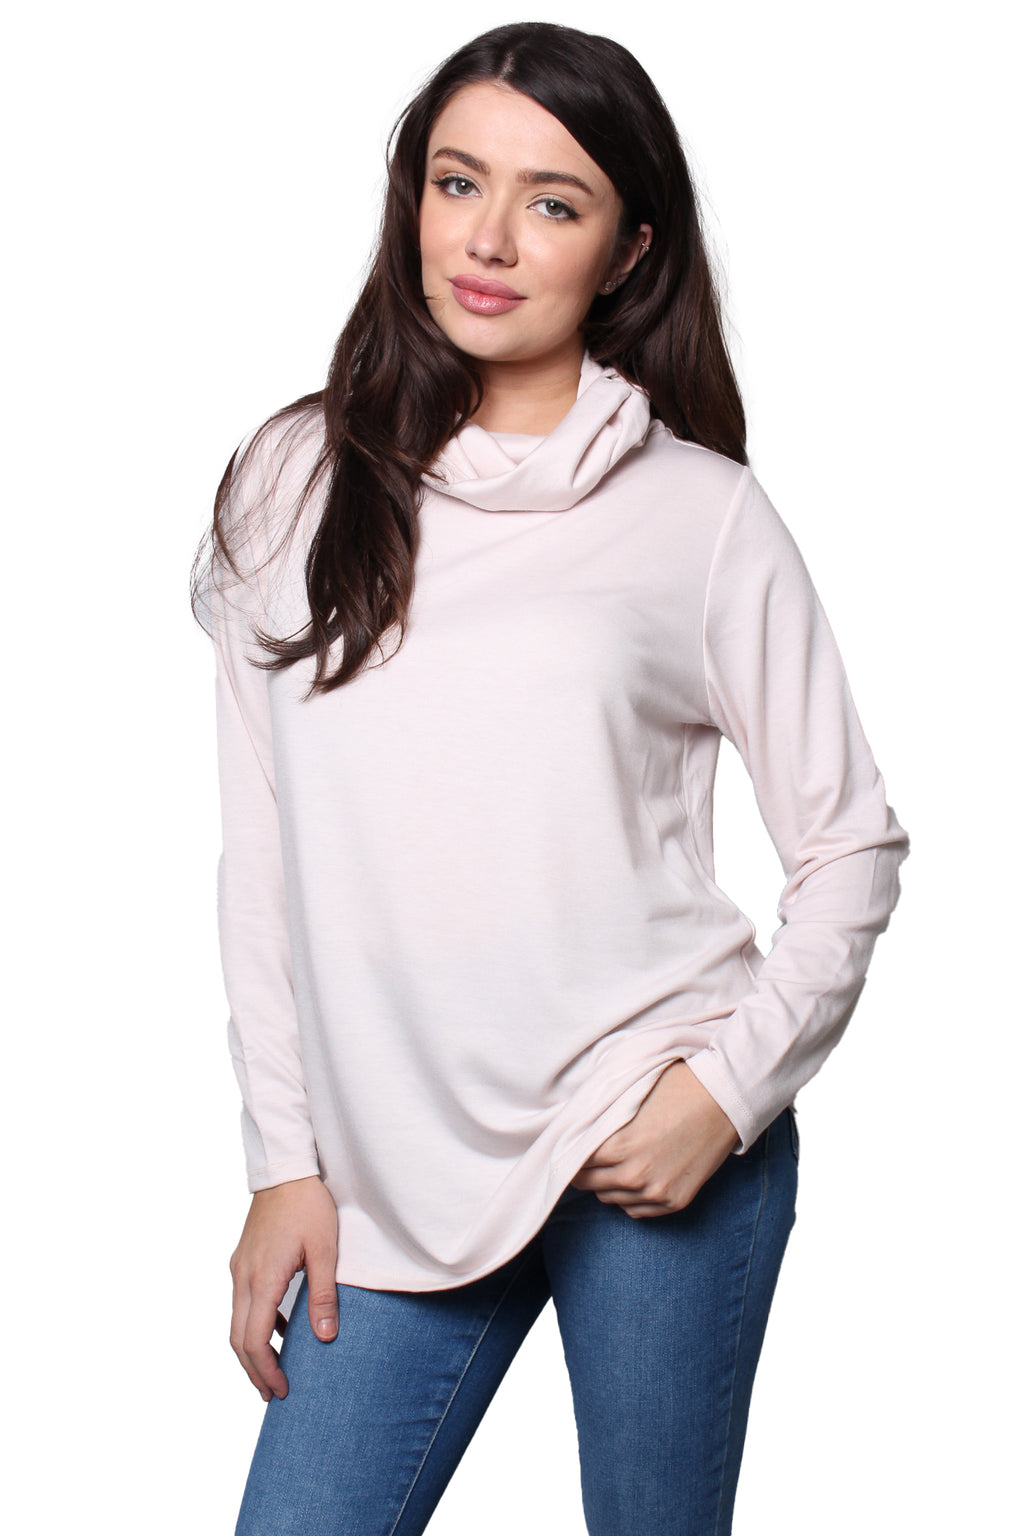 Women's Long Sleeves Cowl Neck Solid Top